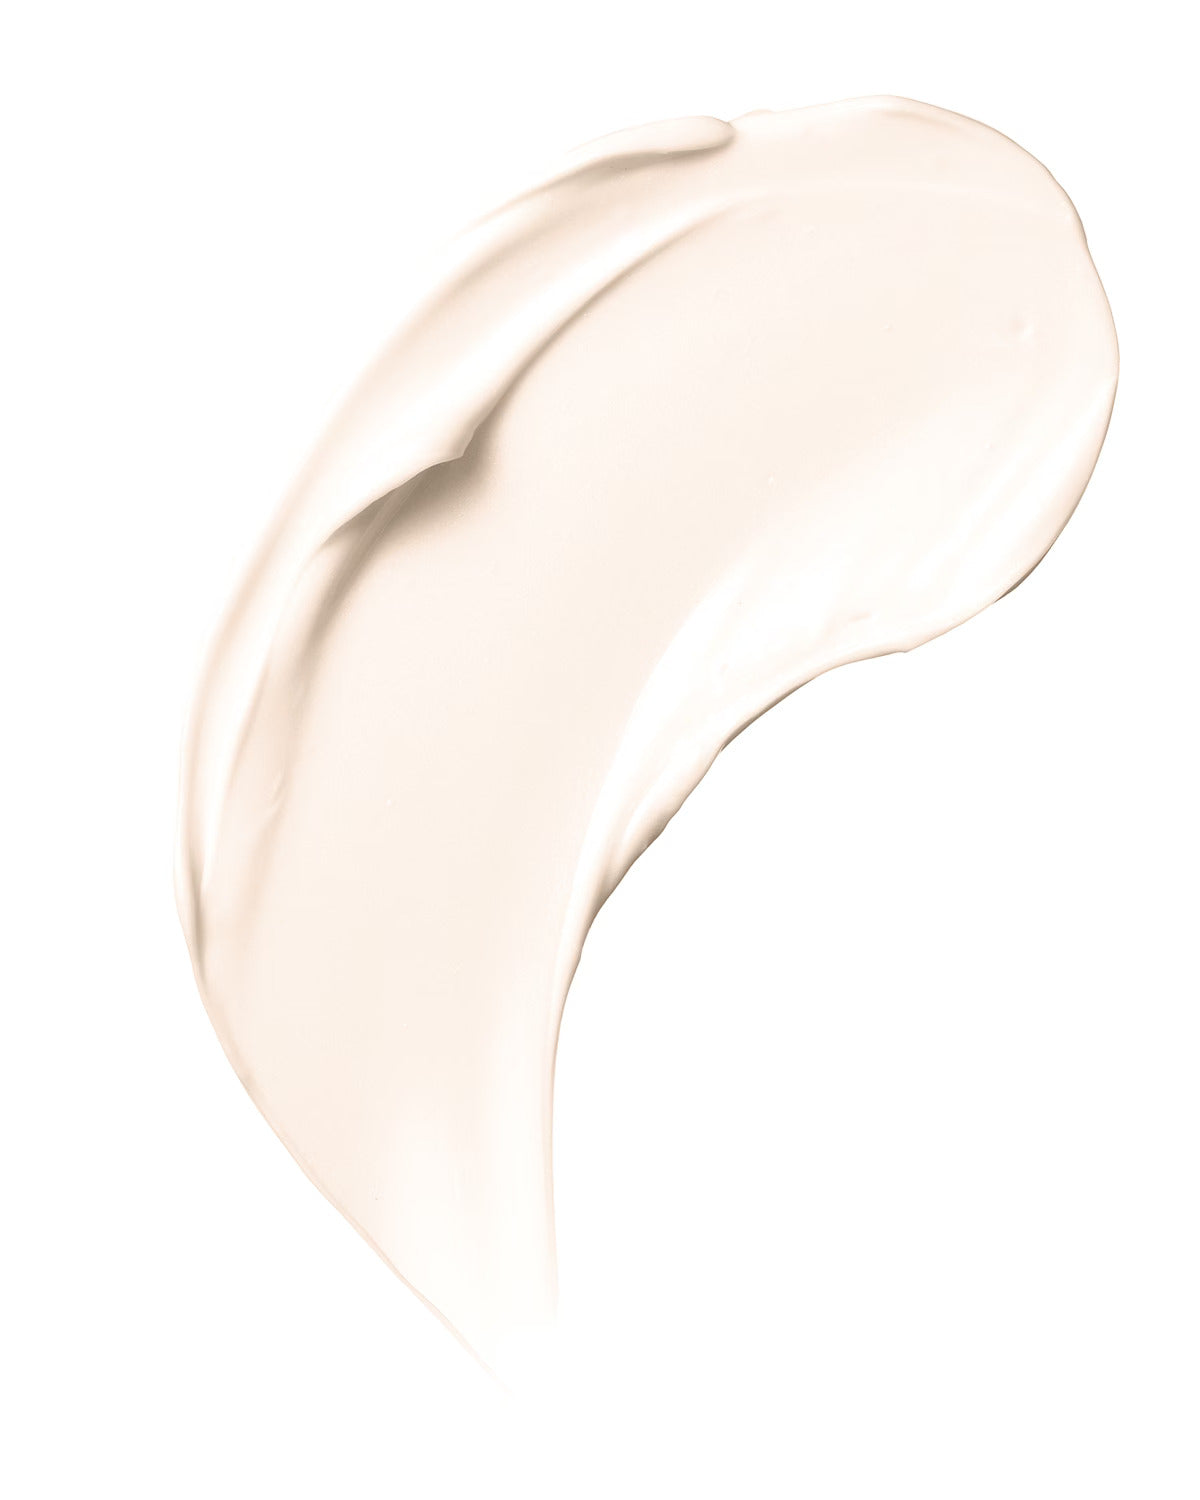 Clinique eye cream All About Eyes